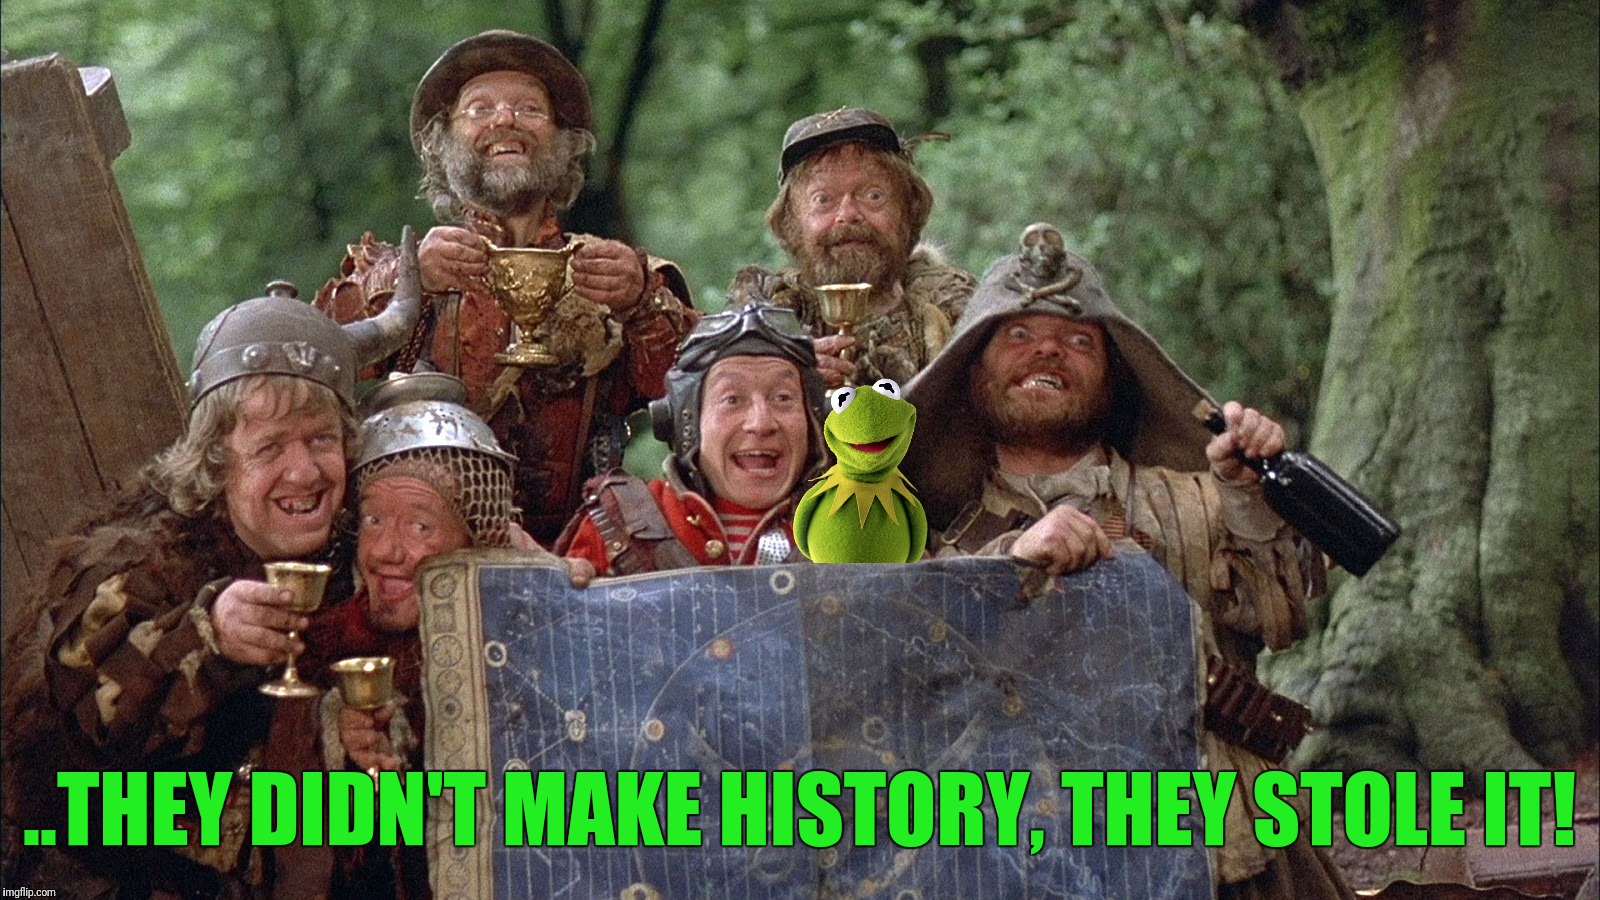 ..THEY DIDN'T MAKE HISTORY, THEY STOLE IT! | made w/ Imgflip meme maker